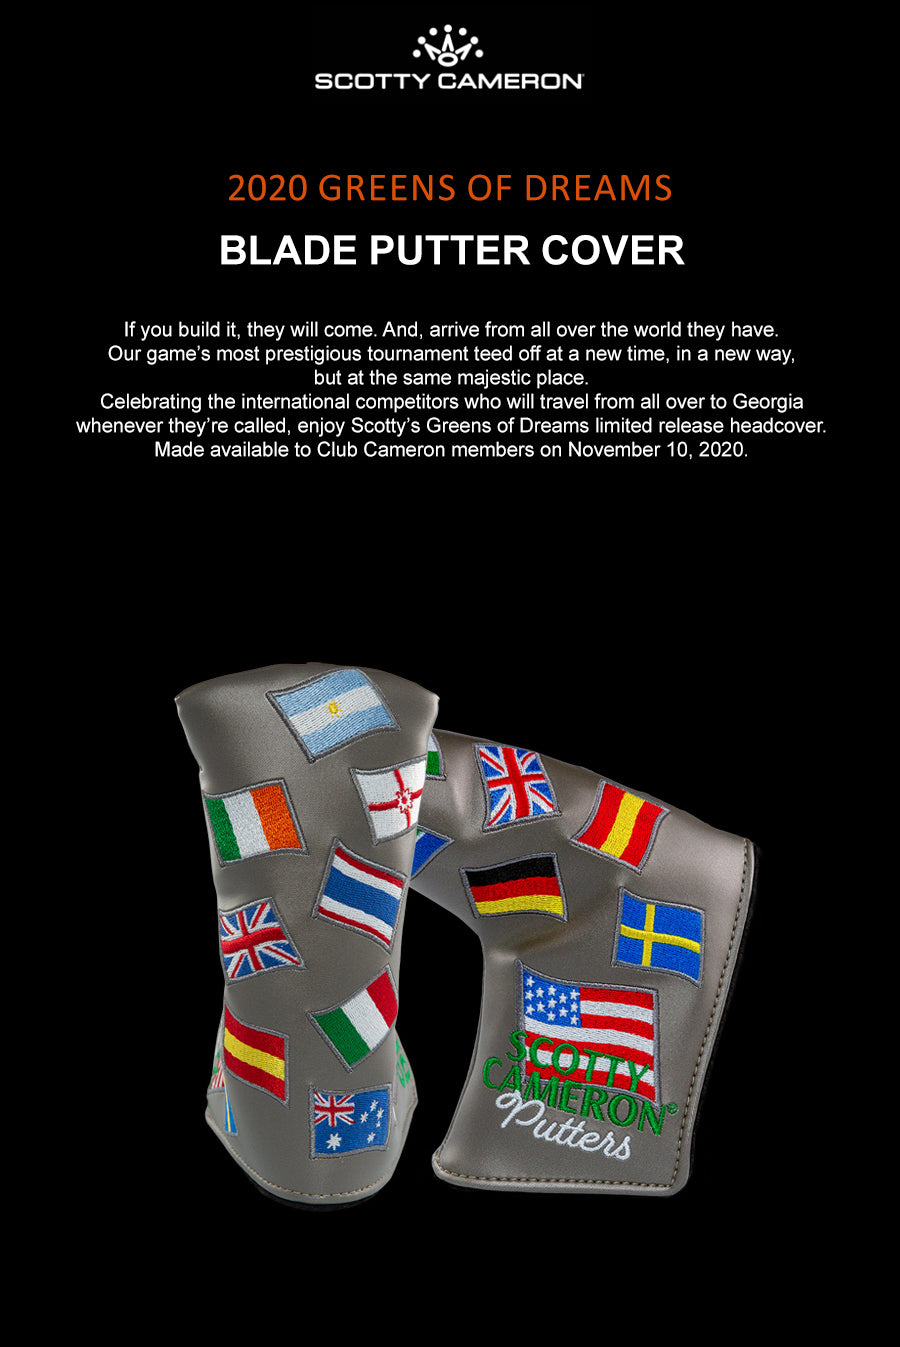 Scotty-Cameron-2020-GREENS-OF-DREAMS-Blade-Putter-Cover